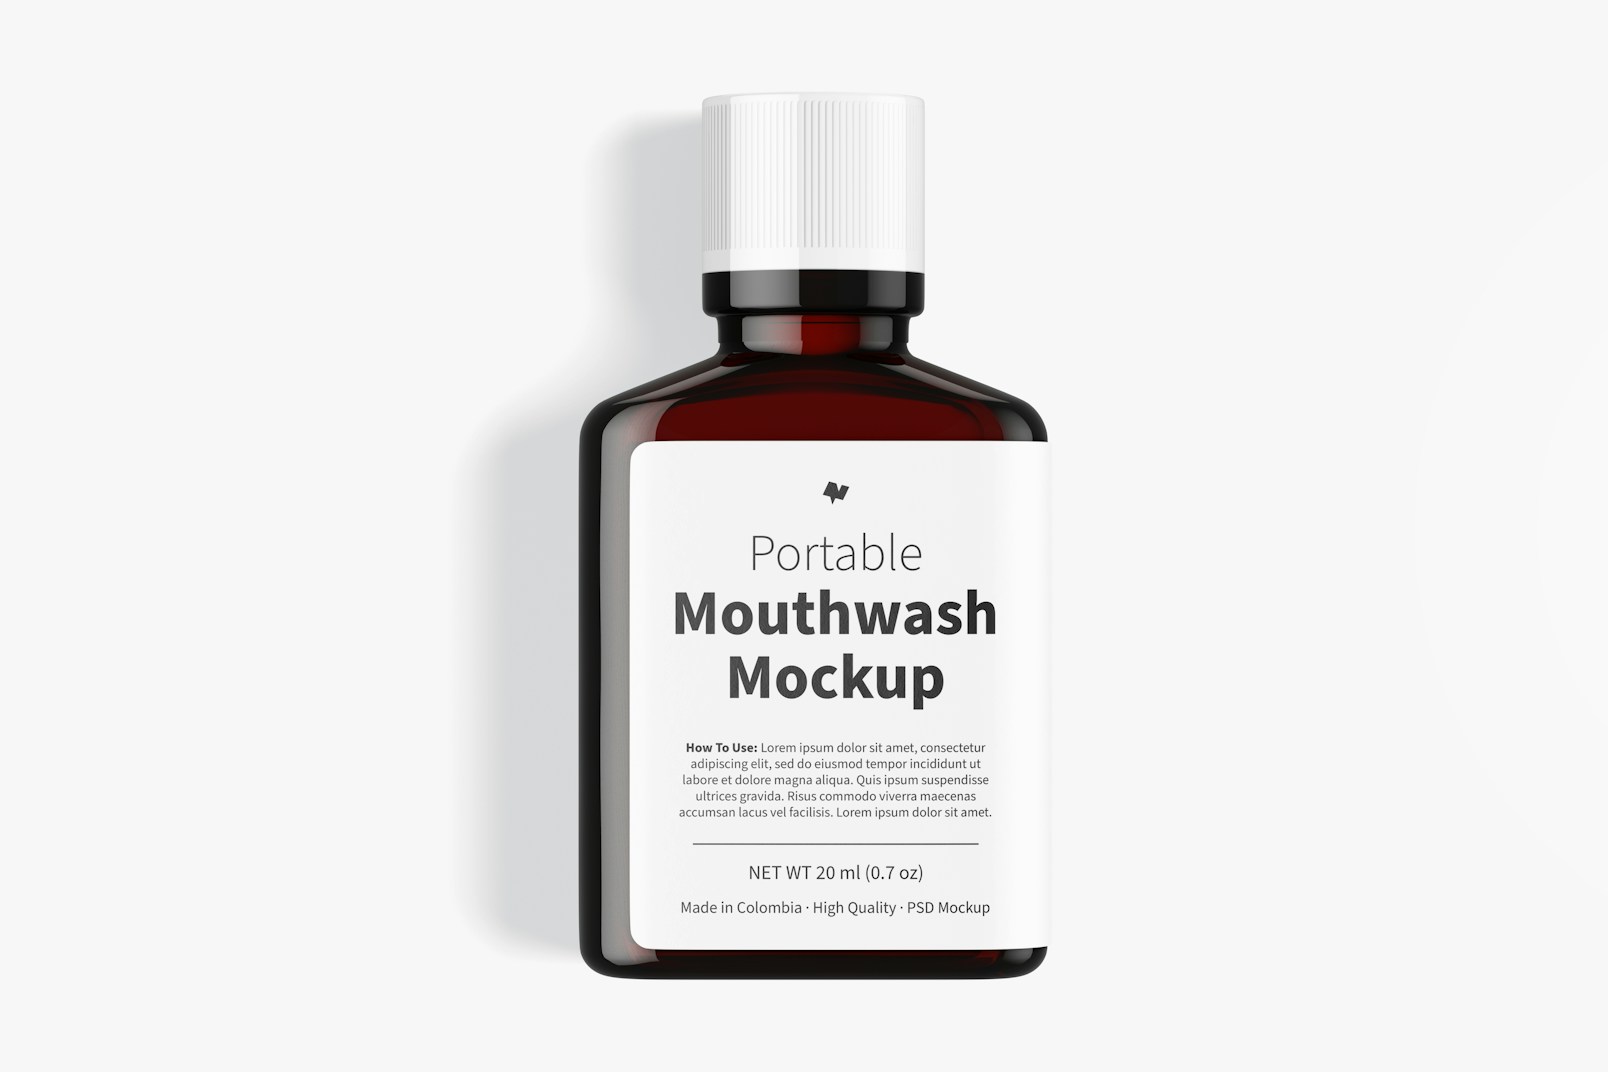 Portable Mouthwash with Label Mockup, Top View